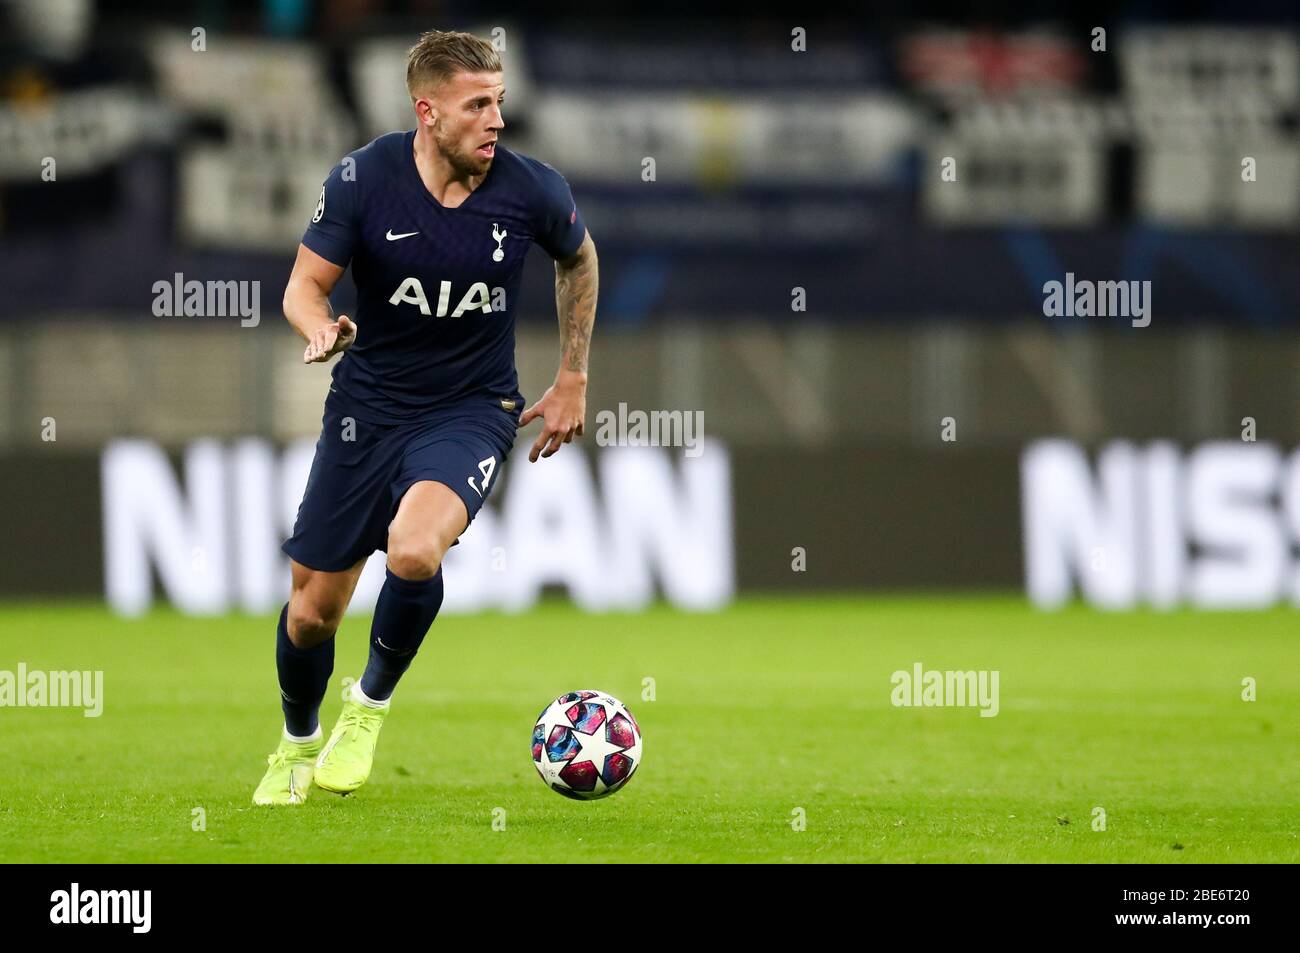 Leipzig, Germany. 10th Mar, 2020. Football: Champions League, Round of 16, RB Leipzig - Tottenham Hotspur in the Red Bull Arena. Tottenham's Toby Alderweireld on the ball. Credit: Jan Woitas/dpa-Zentralbild/dpa/Alamy Live News Stock Photo